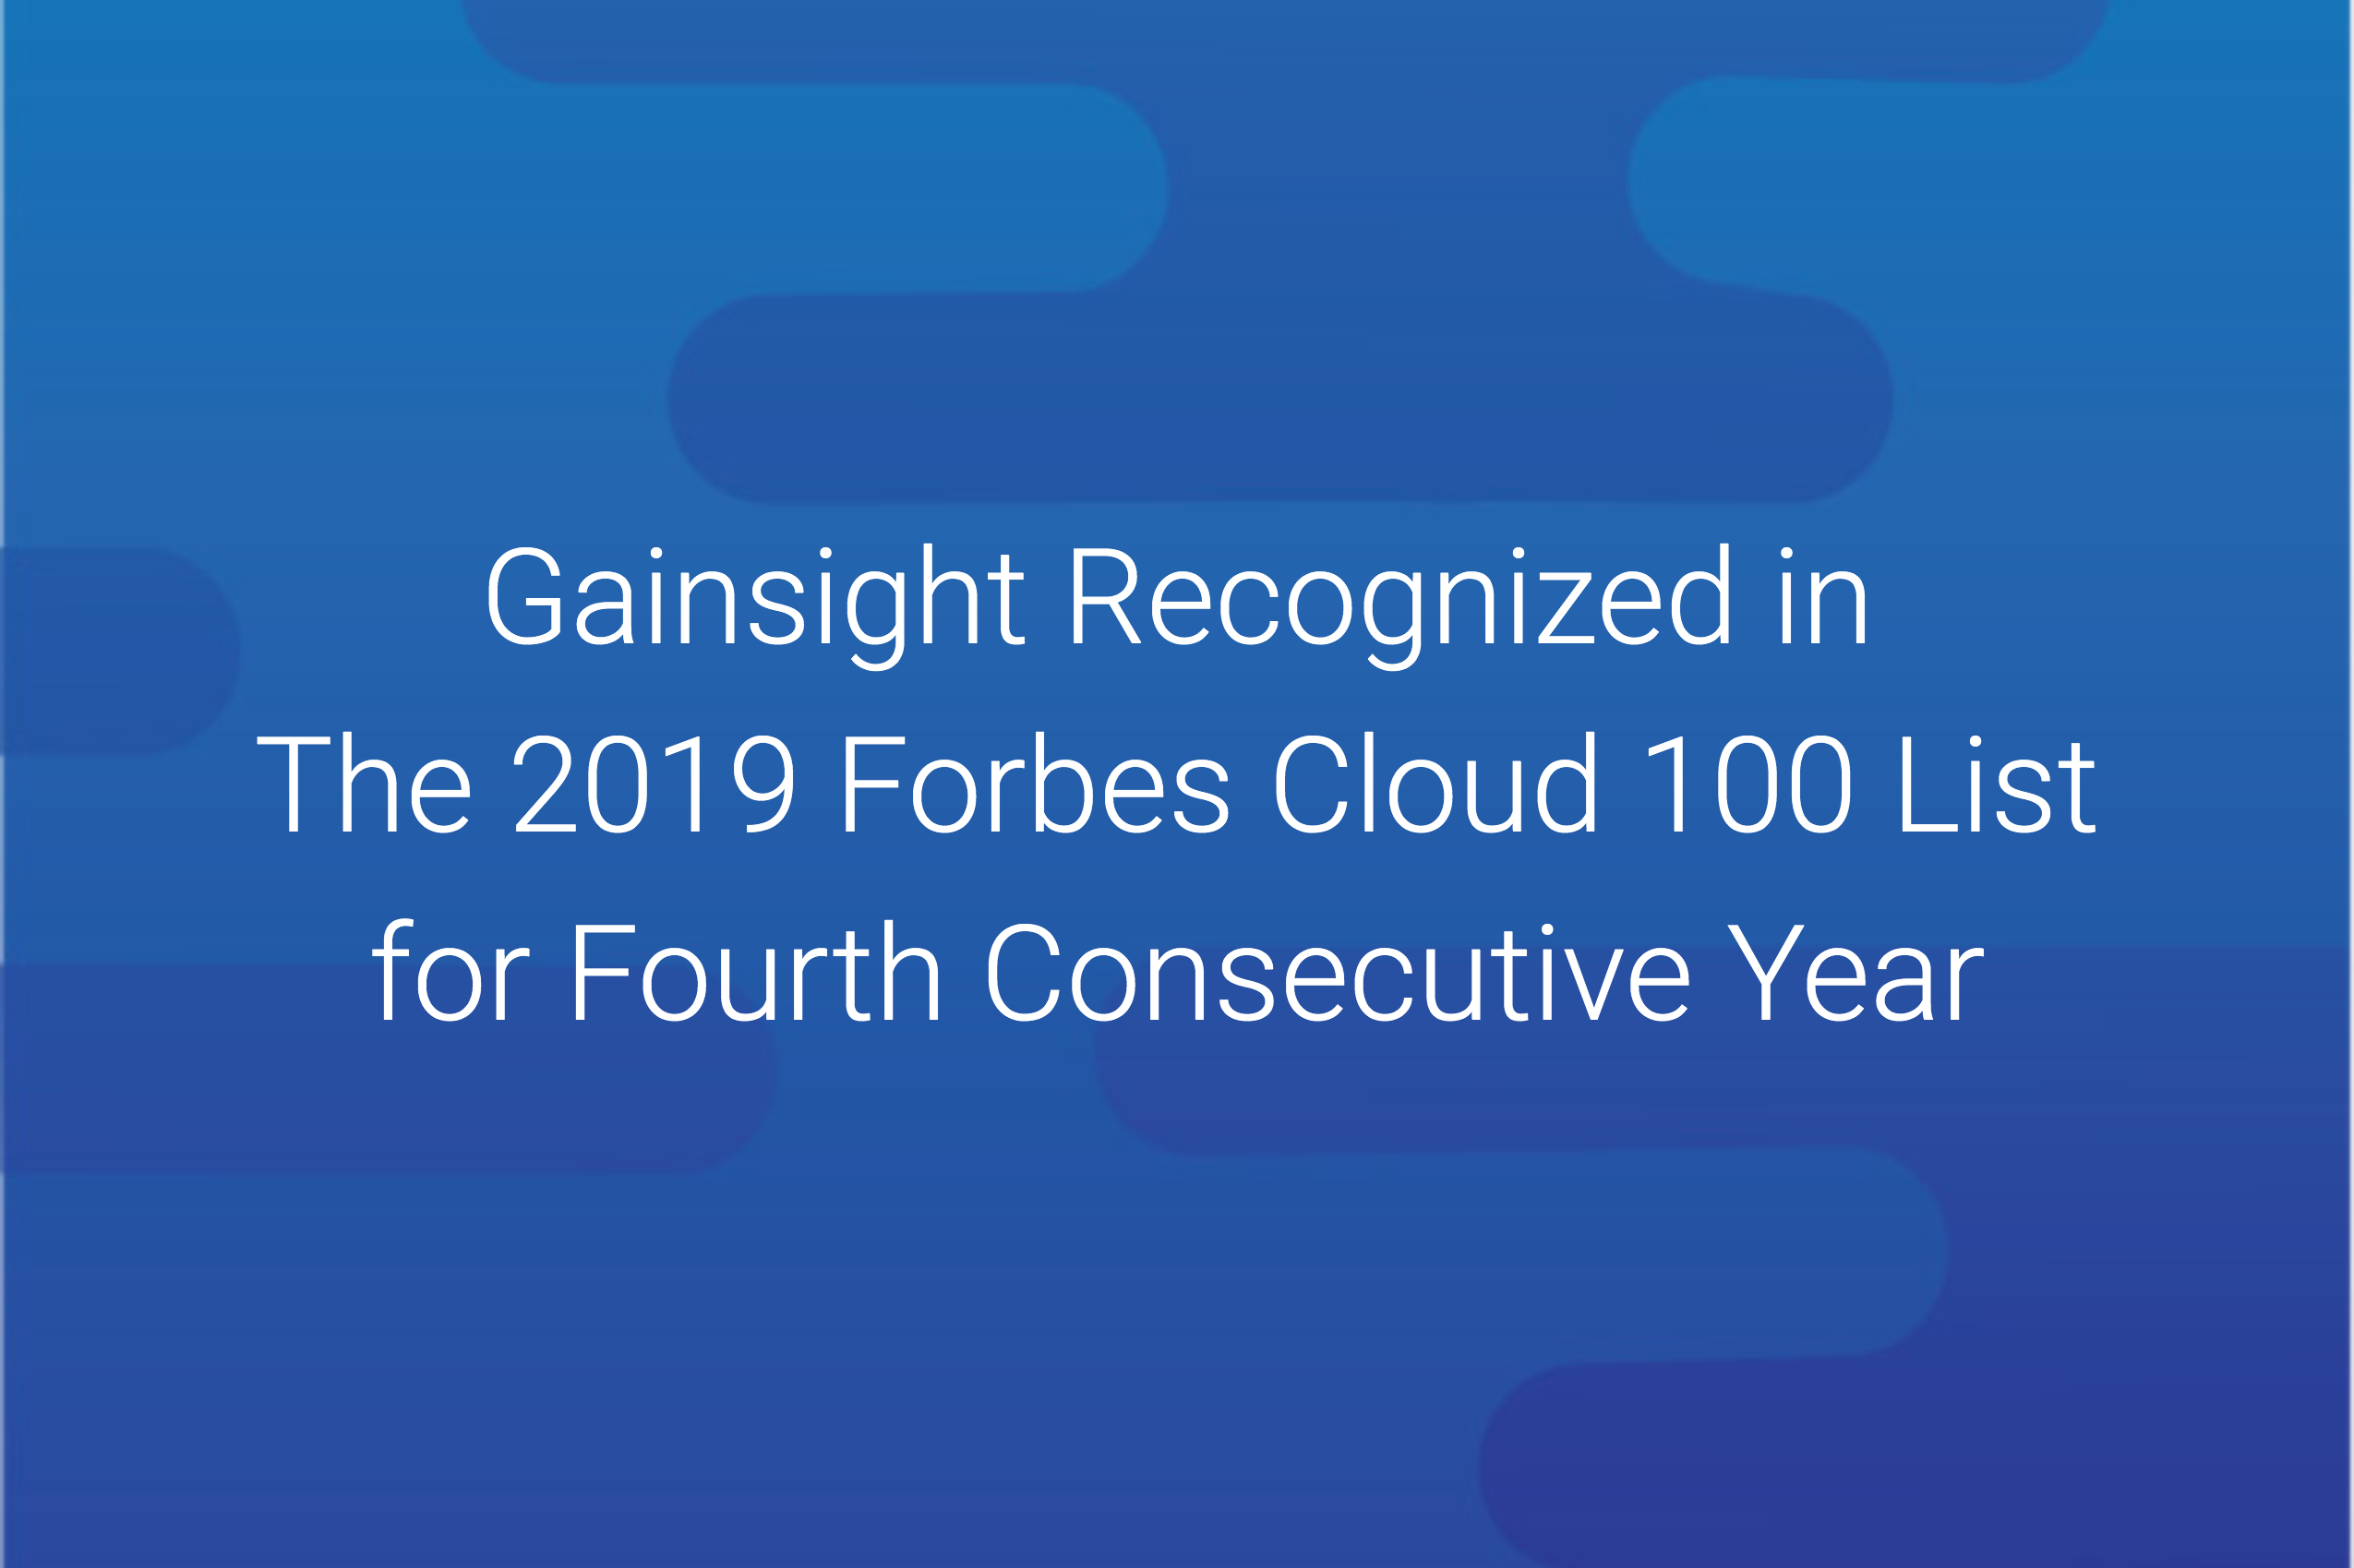 Gainsight Recognized in The 2019 Forbes Cloud 100 List for Fourth Consecutive Year Image